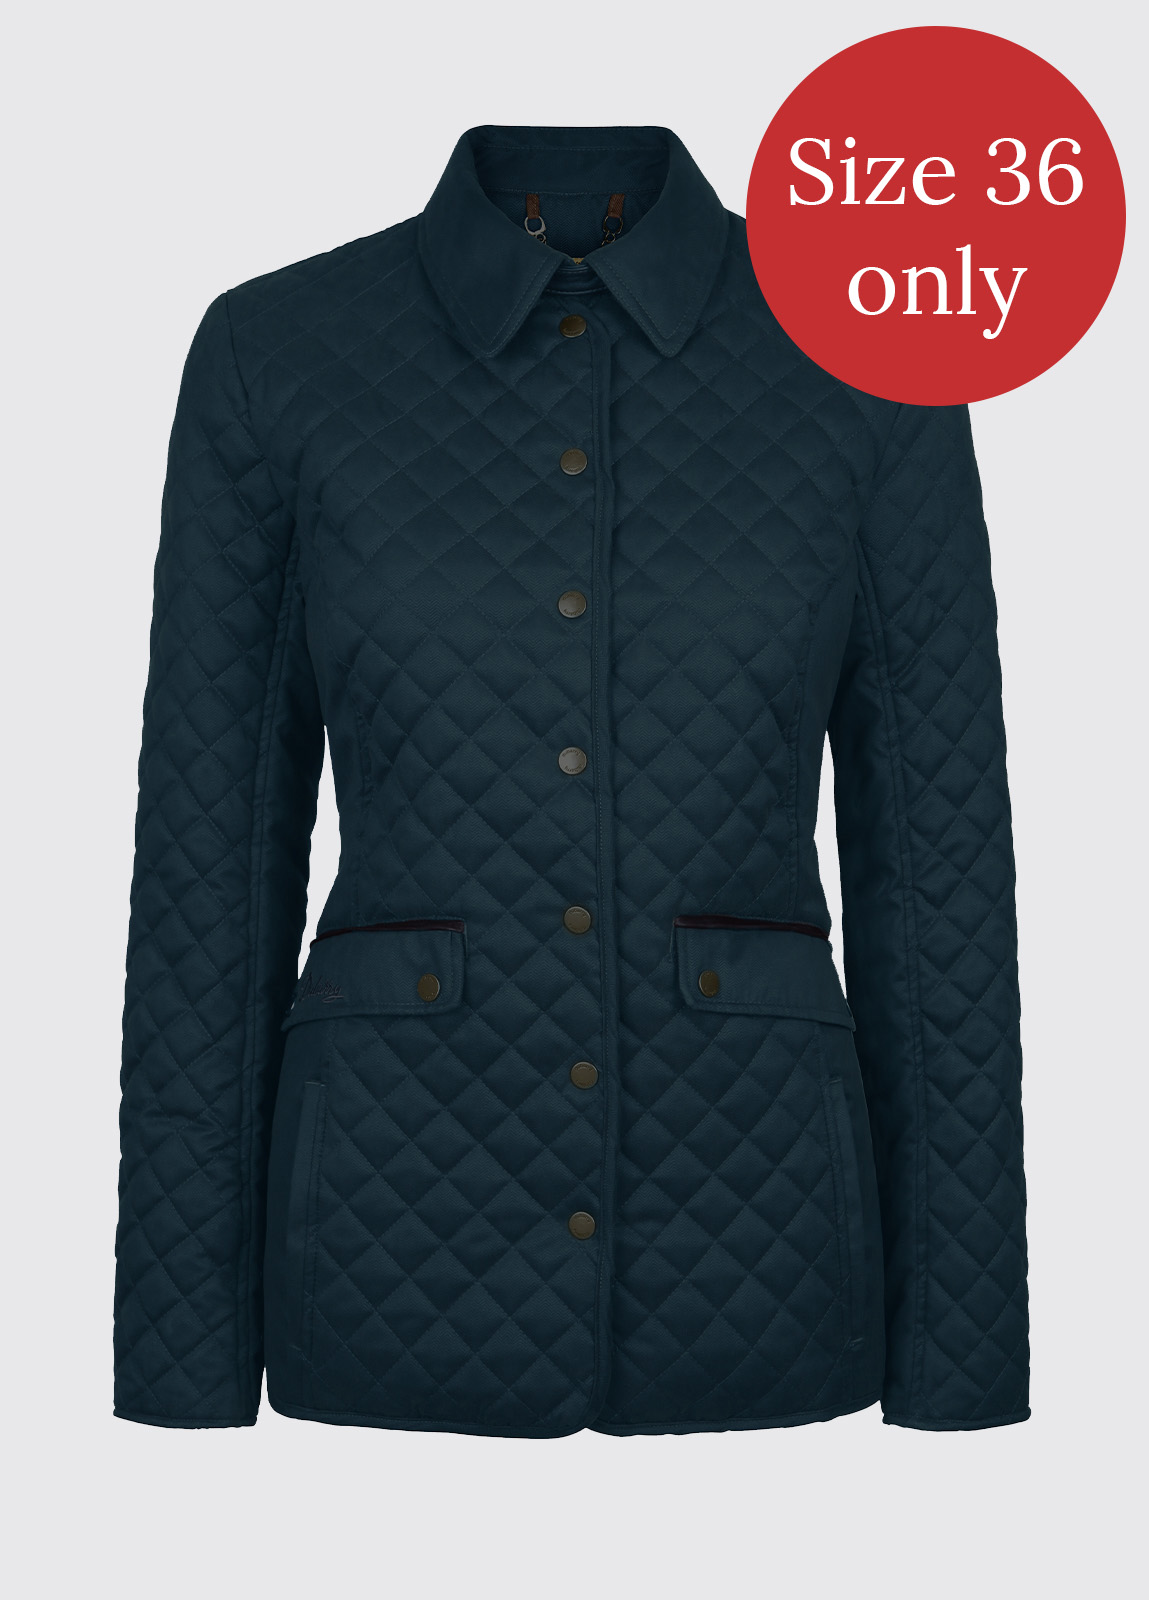 Shaw Women's Quilted Jacket - Petrol Blue